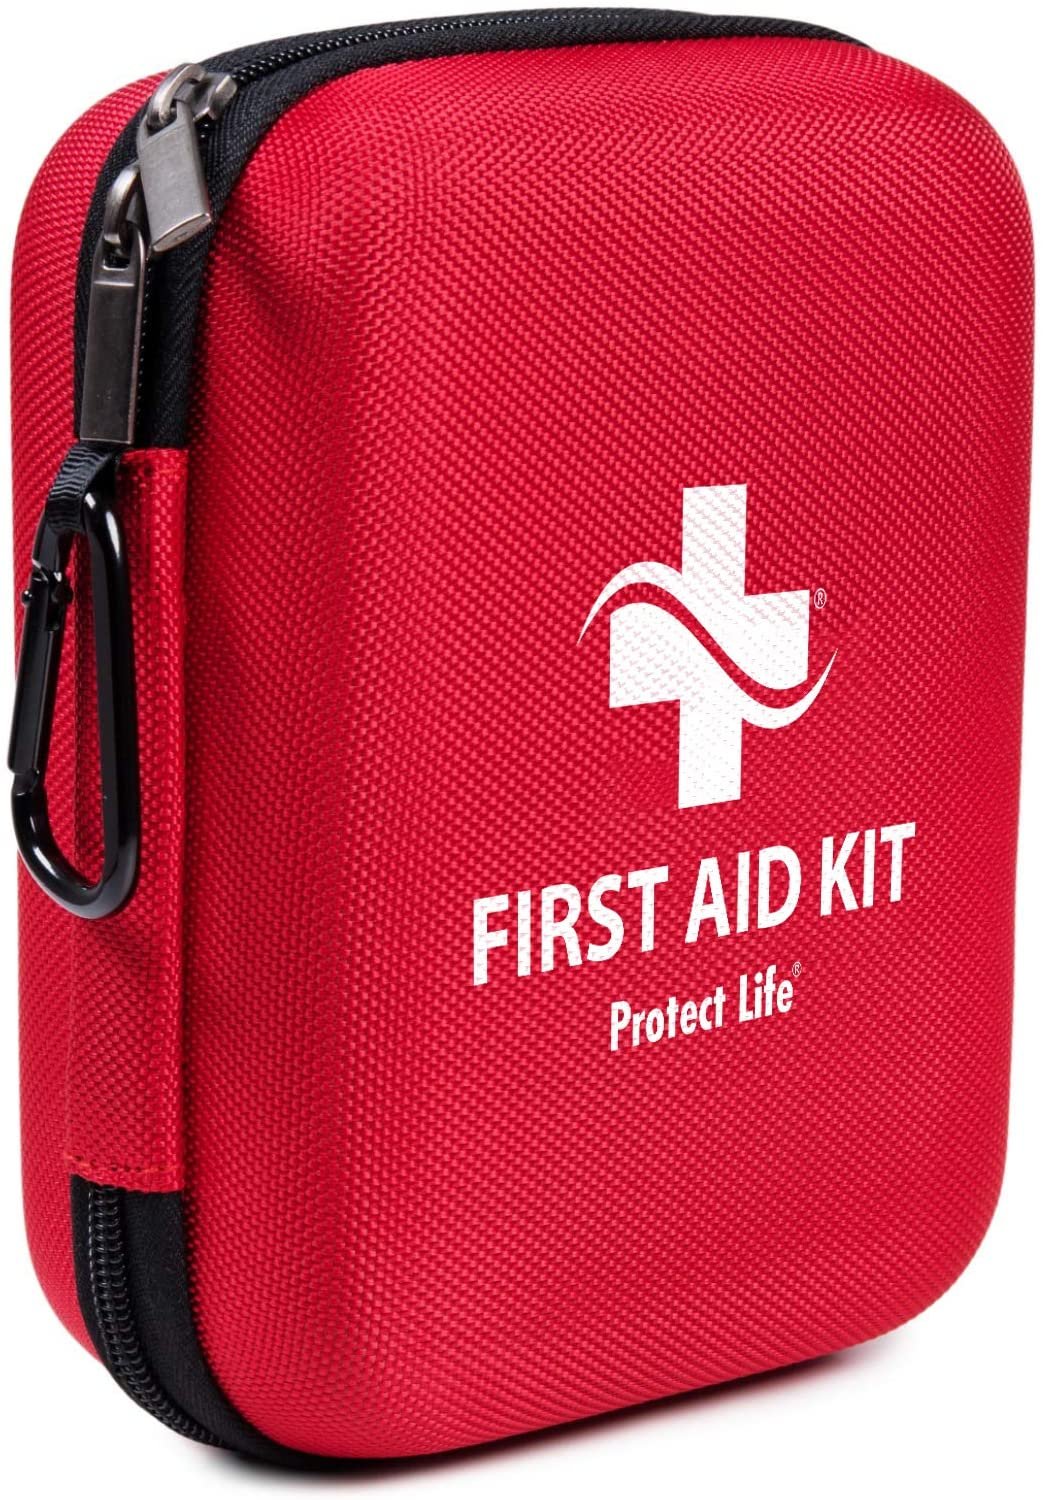 Protect Life First Aid Kit